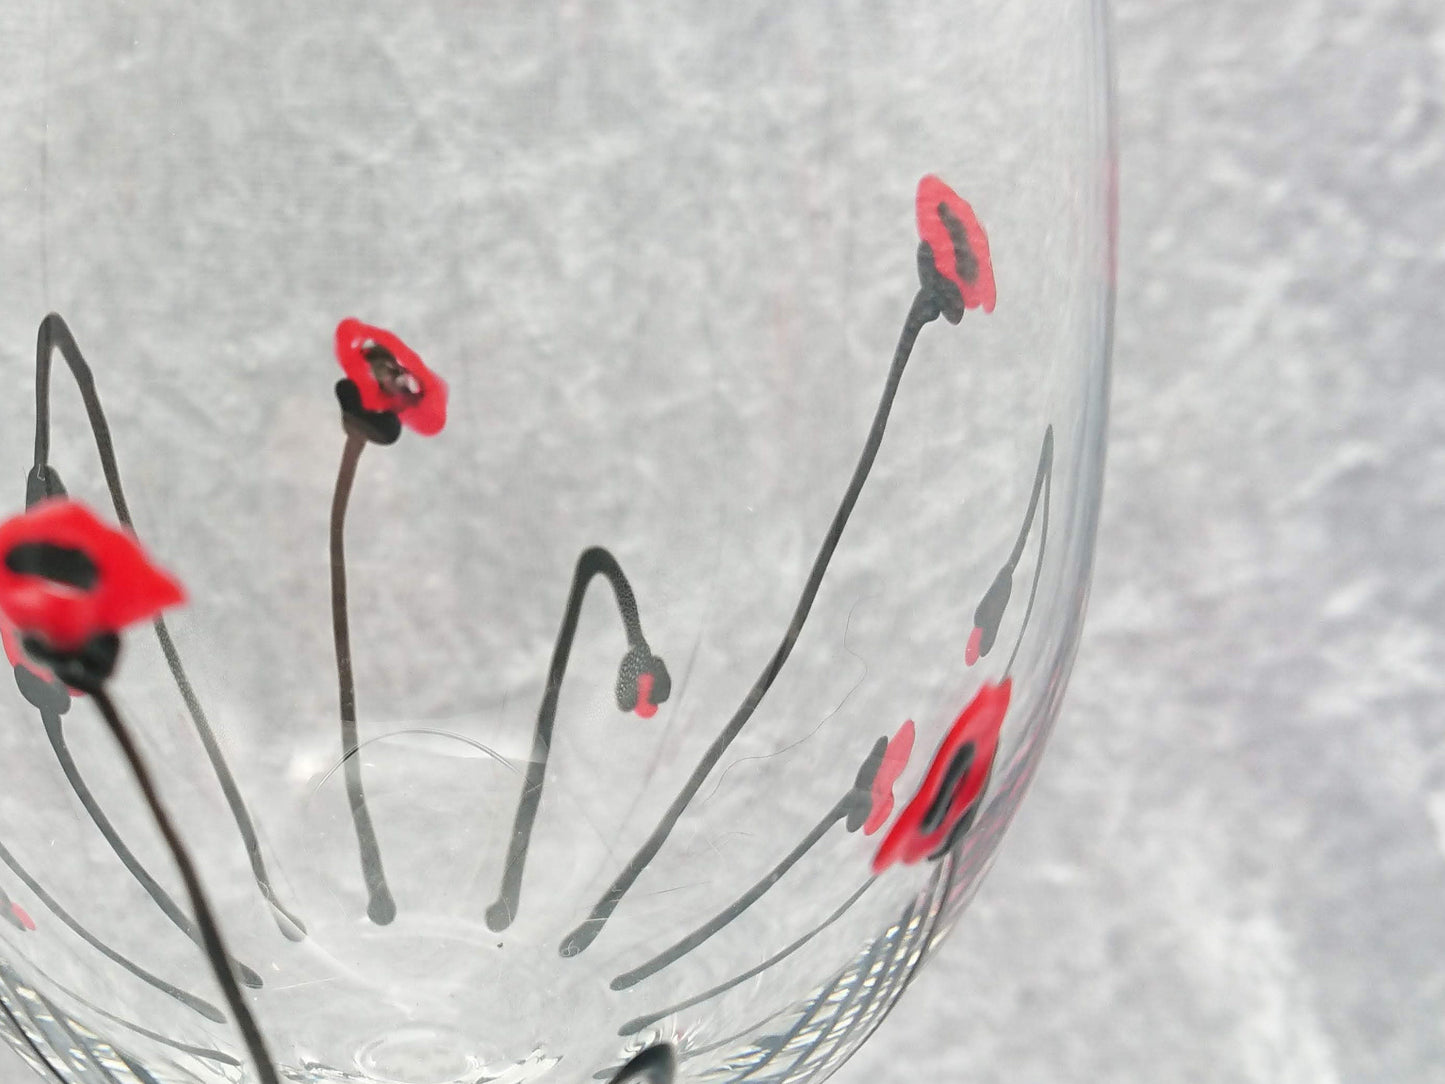 Hand-painted Poppy small wine glass